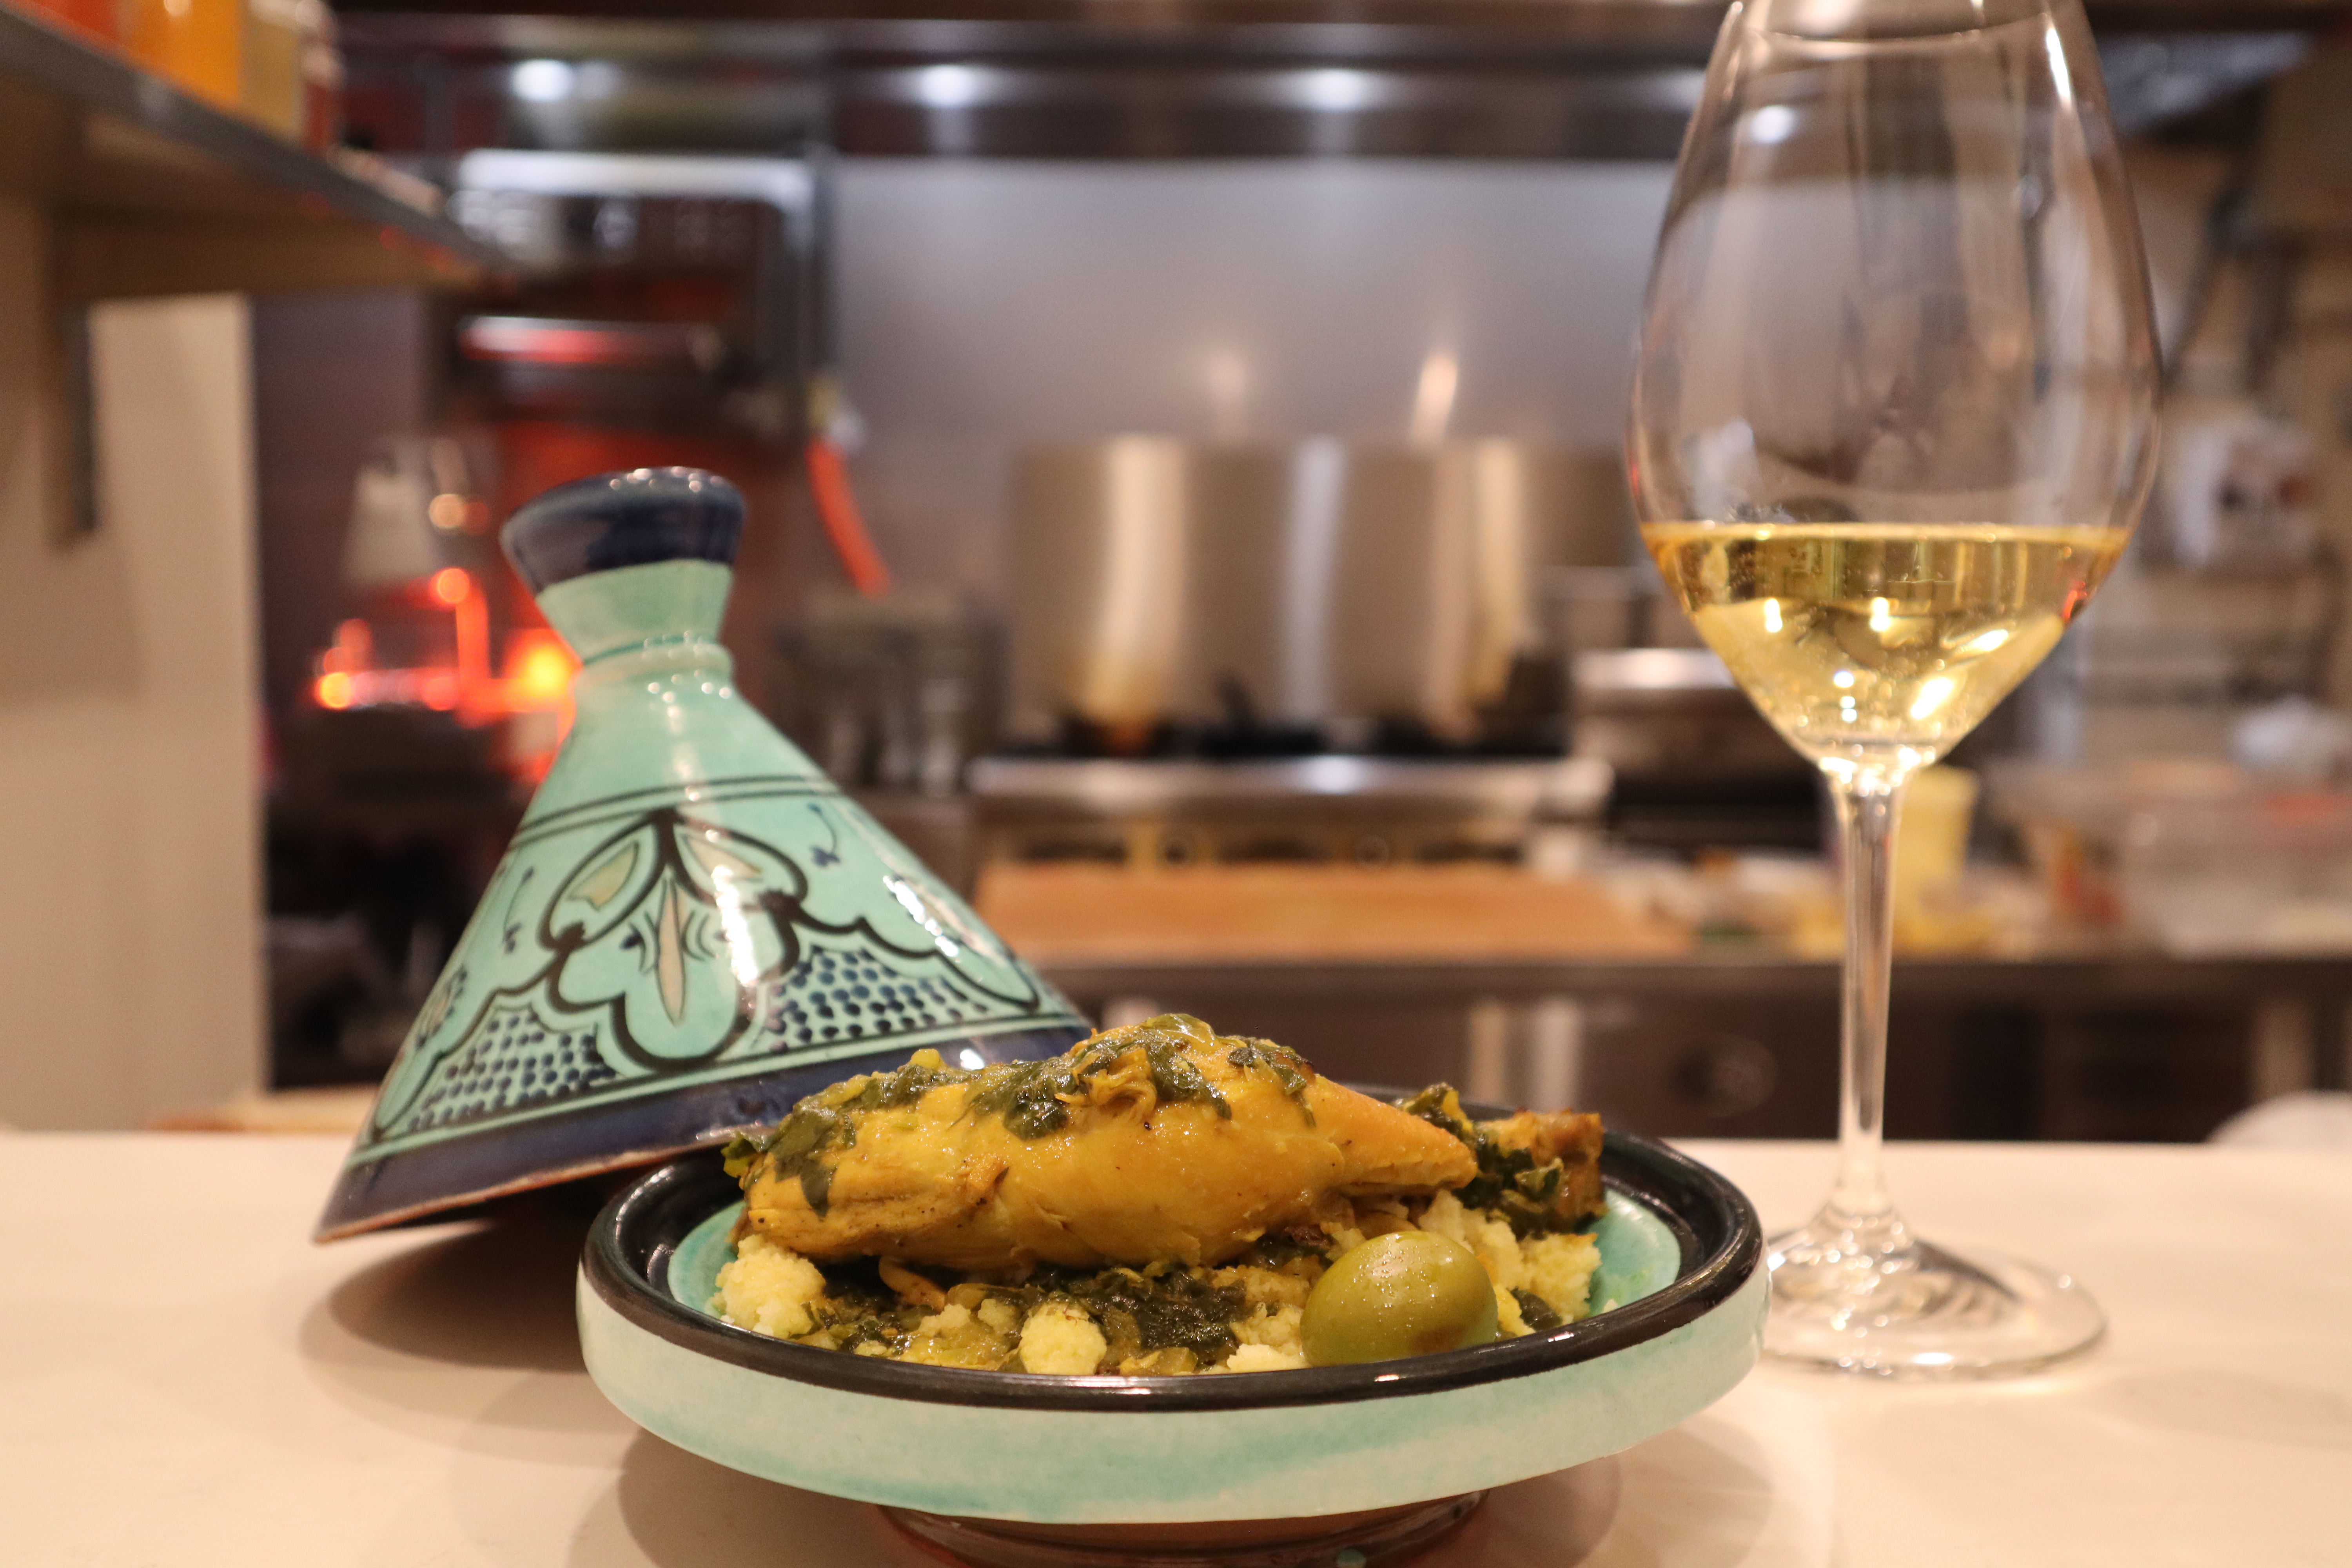 The chicken tagine main with a glass of white wine.